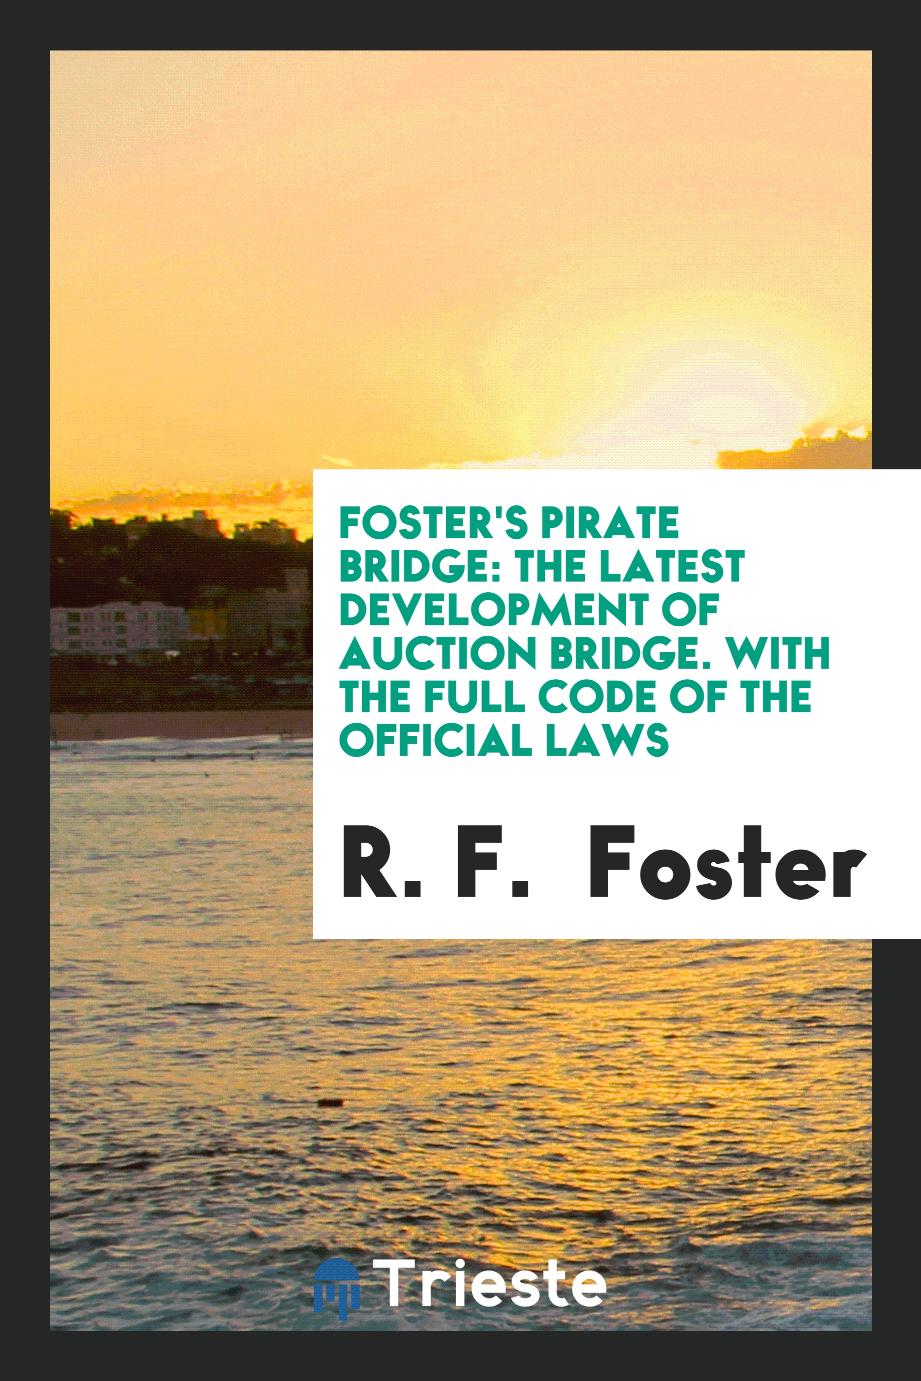 Foster's Pirate Bridge: The Latest Development of Auction Bridge. With the Full Code of the Official Laws